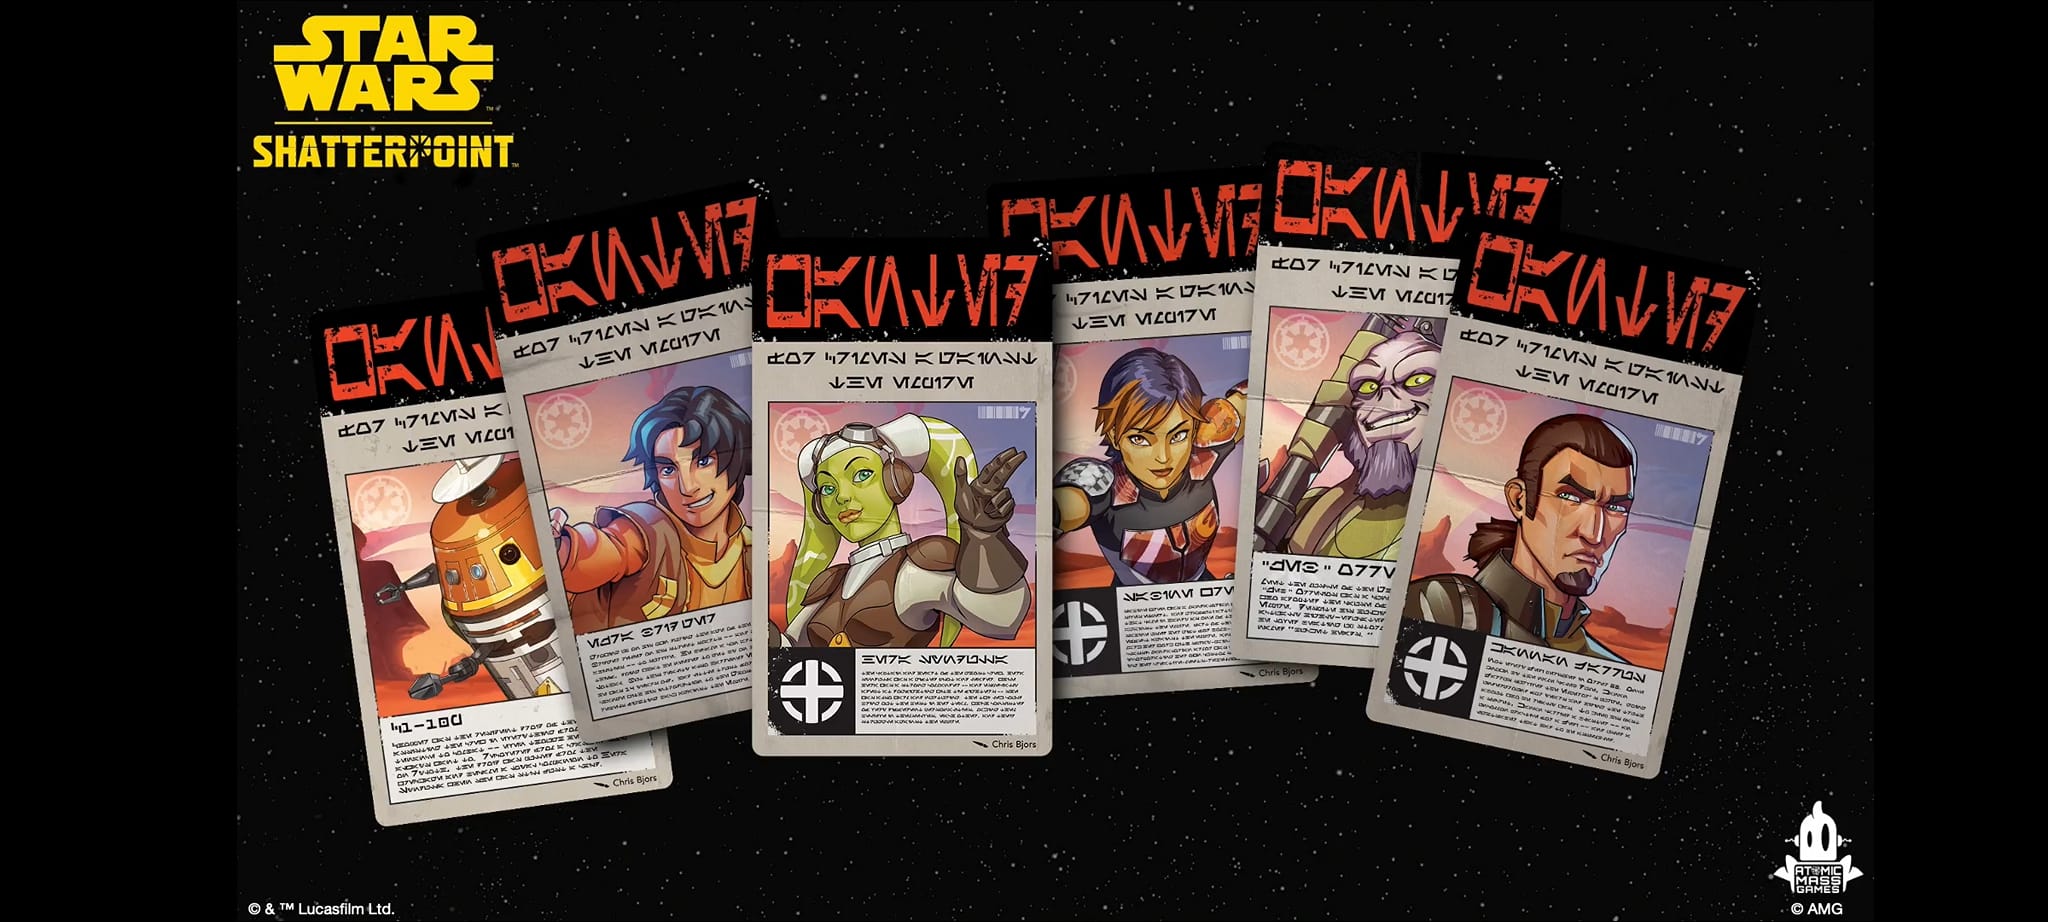 Star Wars: Shatterpoint is a new tabletop wargame inspired by '80s cartoons